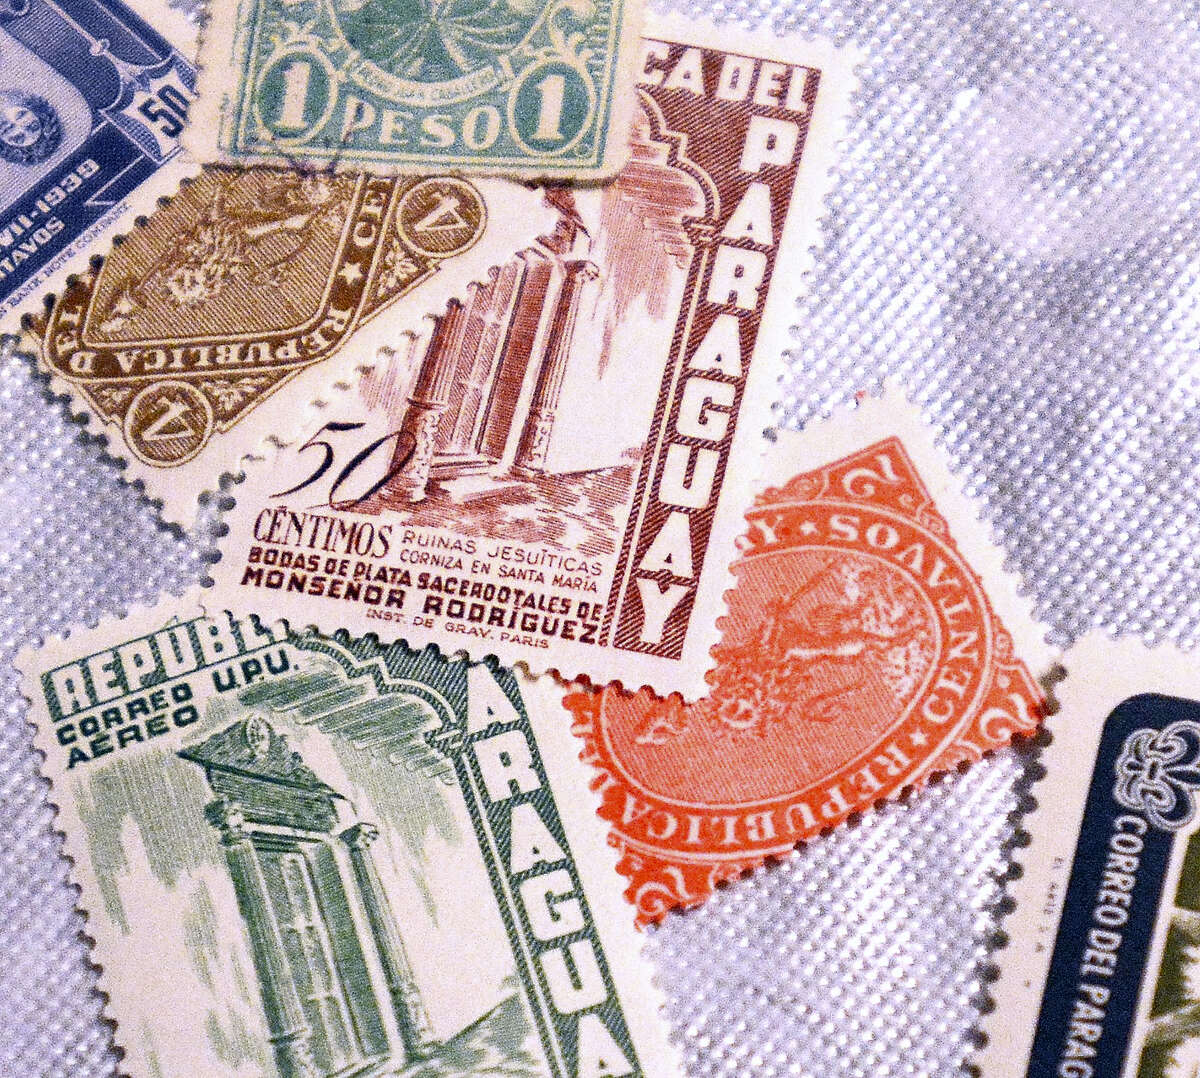 “If you’ve got any curious streak in you, then you should be collecting stamps,” says Mike Frechette, a member of the New Haven Philatelic Society who will host a workshop Saturday at the Russell Library in Middletown.